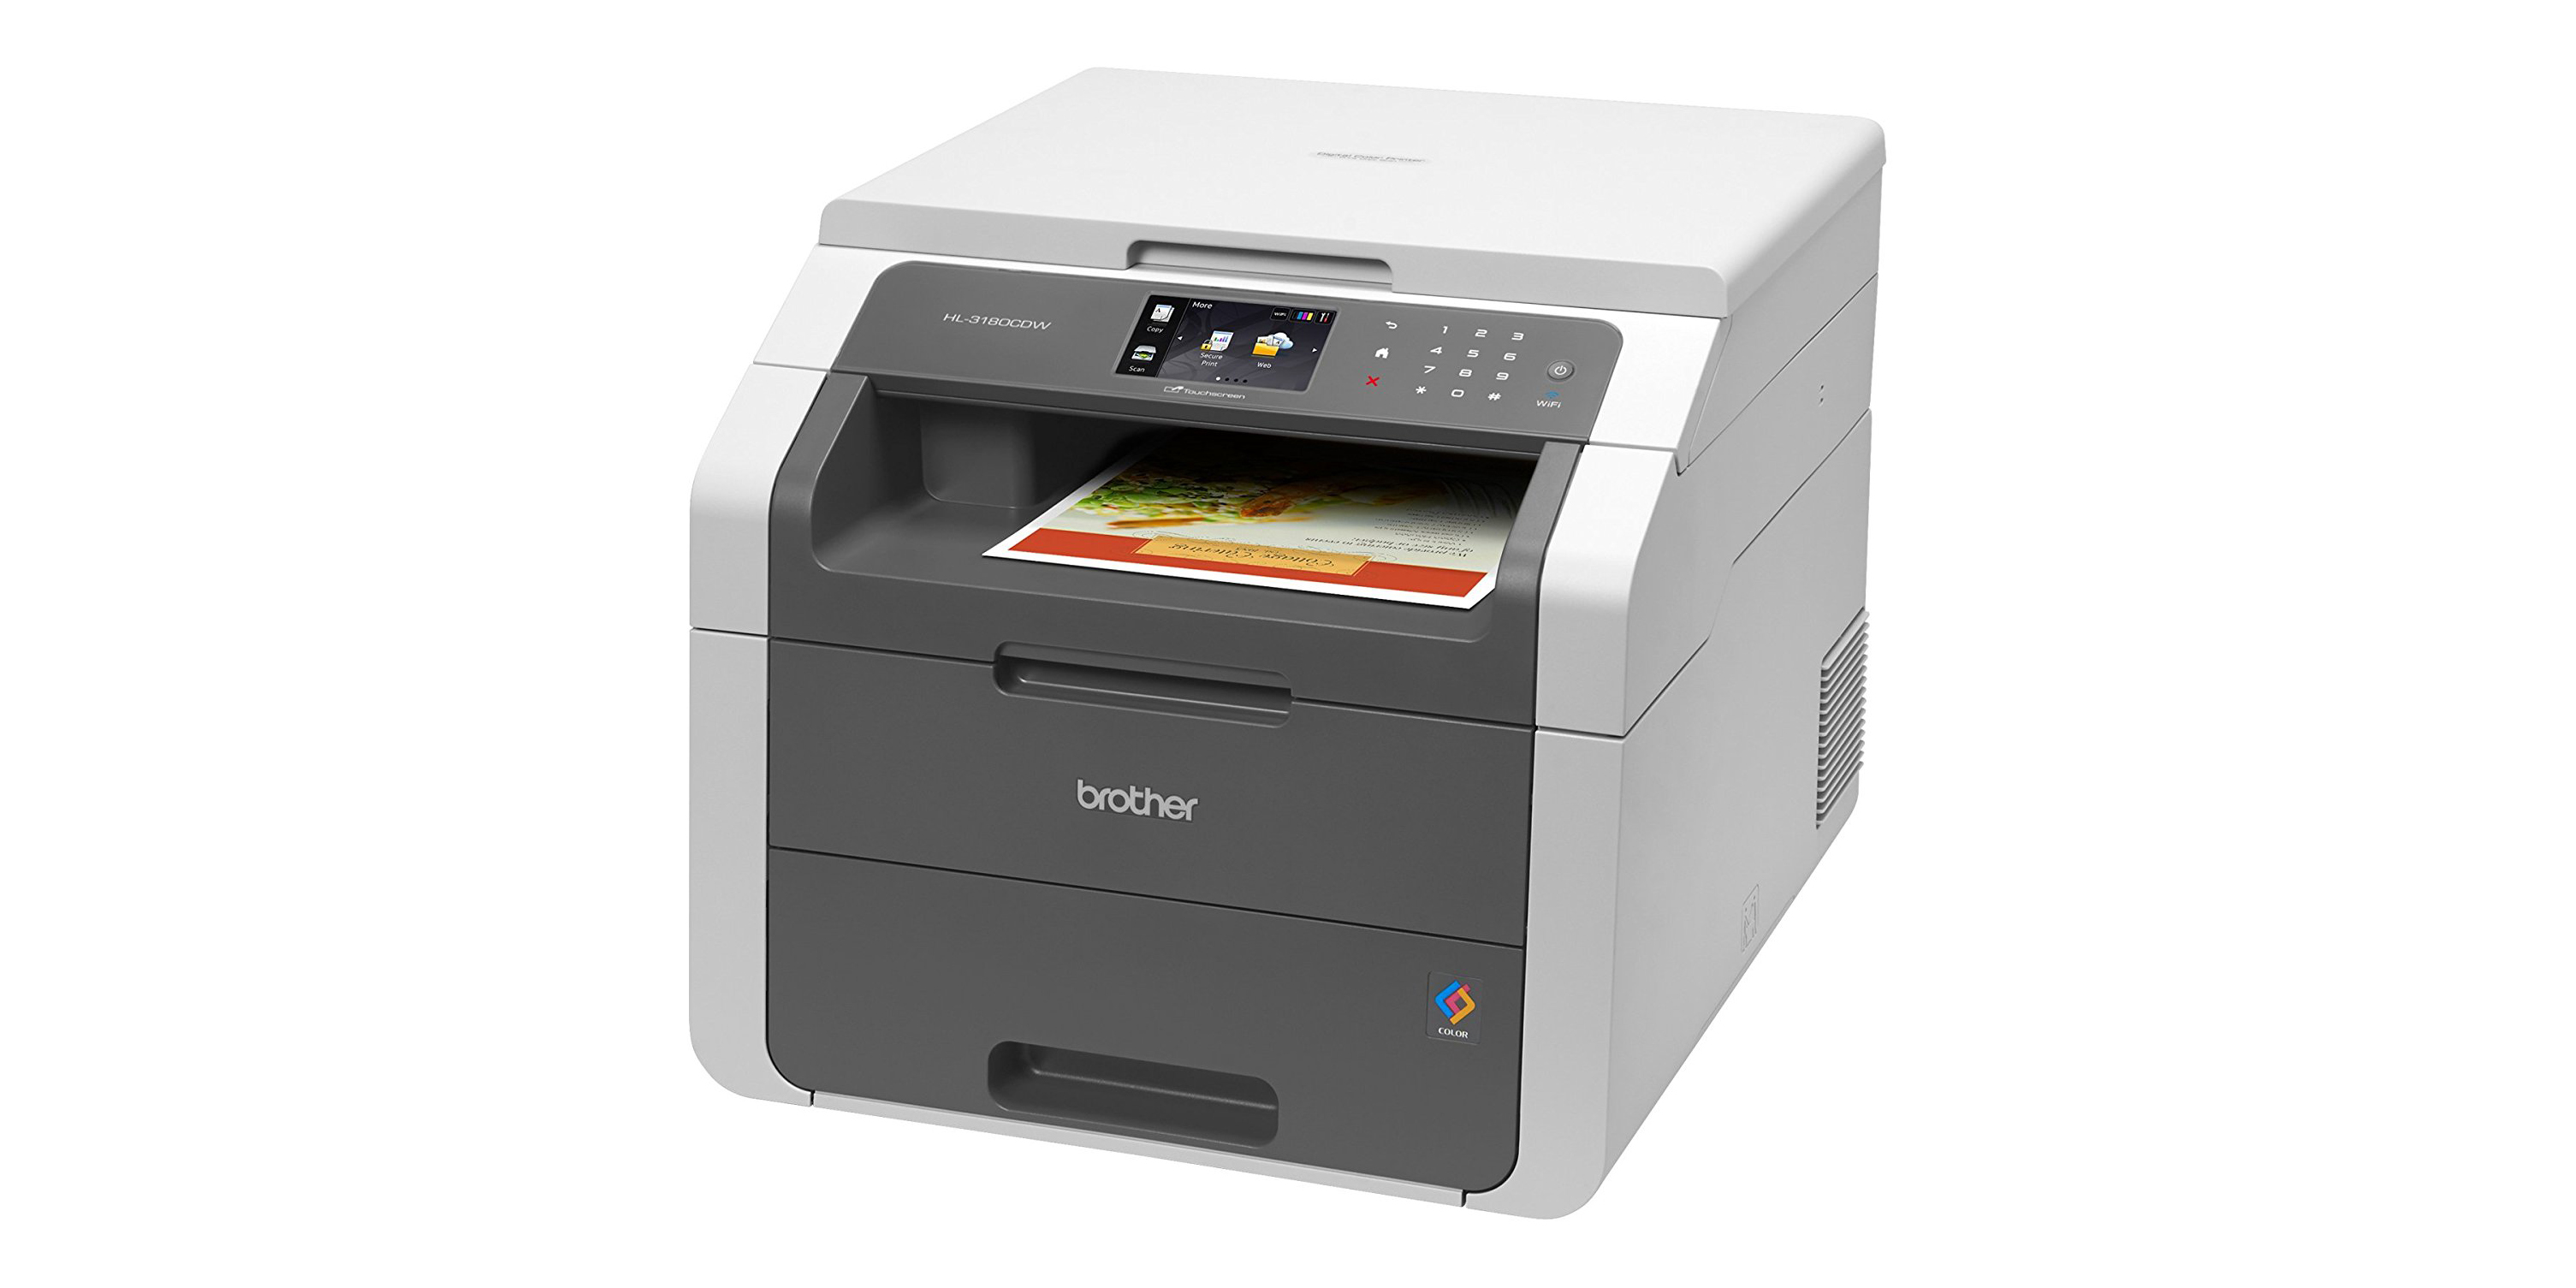 brother mfc-9130cw scan to mac from printer